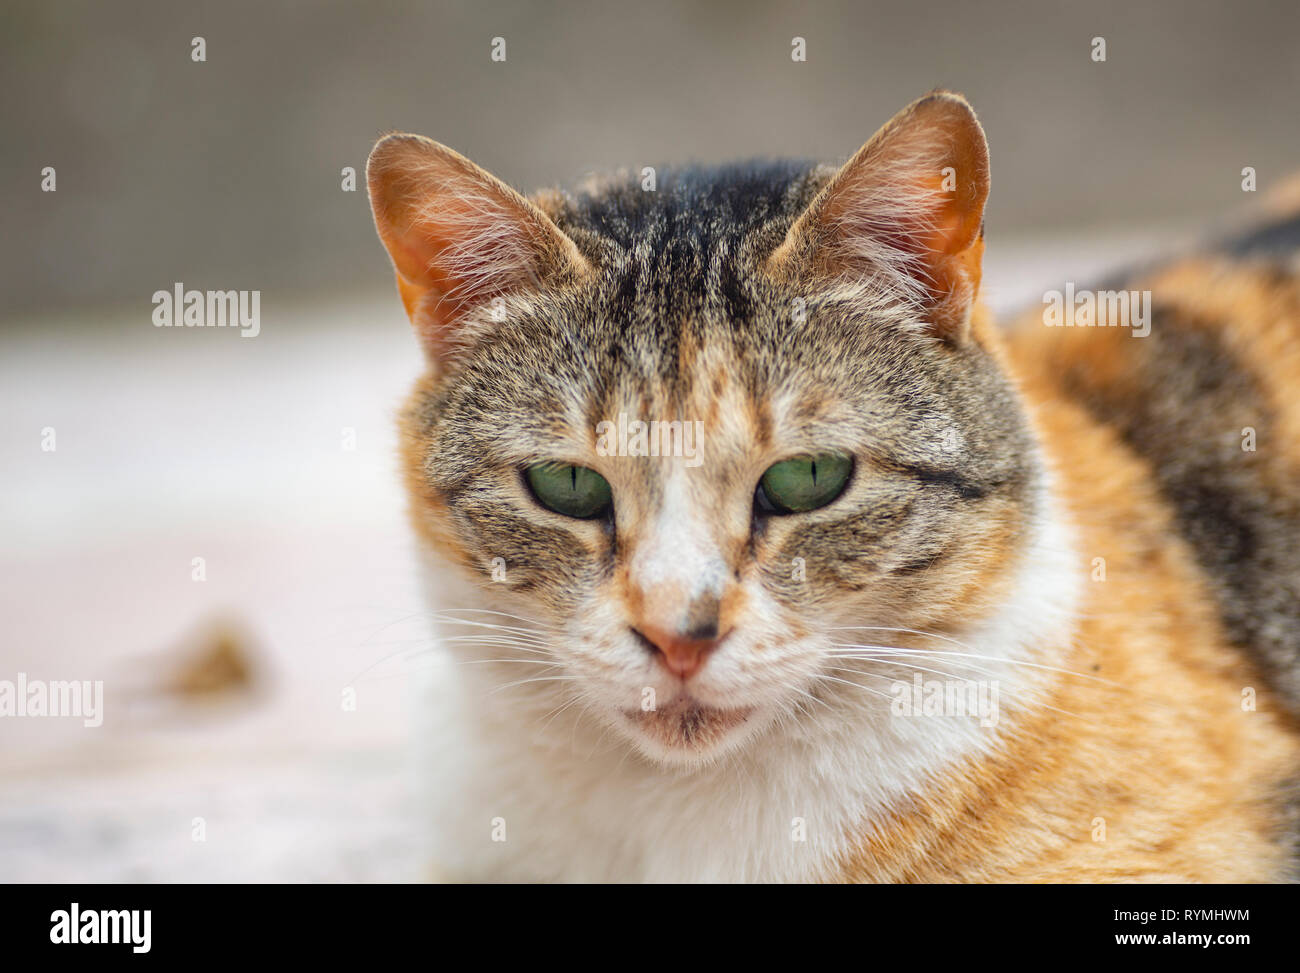 Green Eyed Squinting Cat. Stock Photo